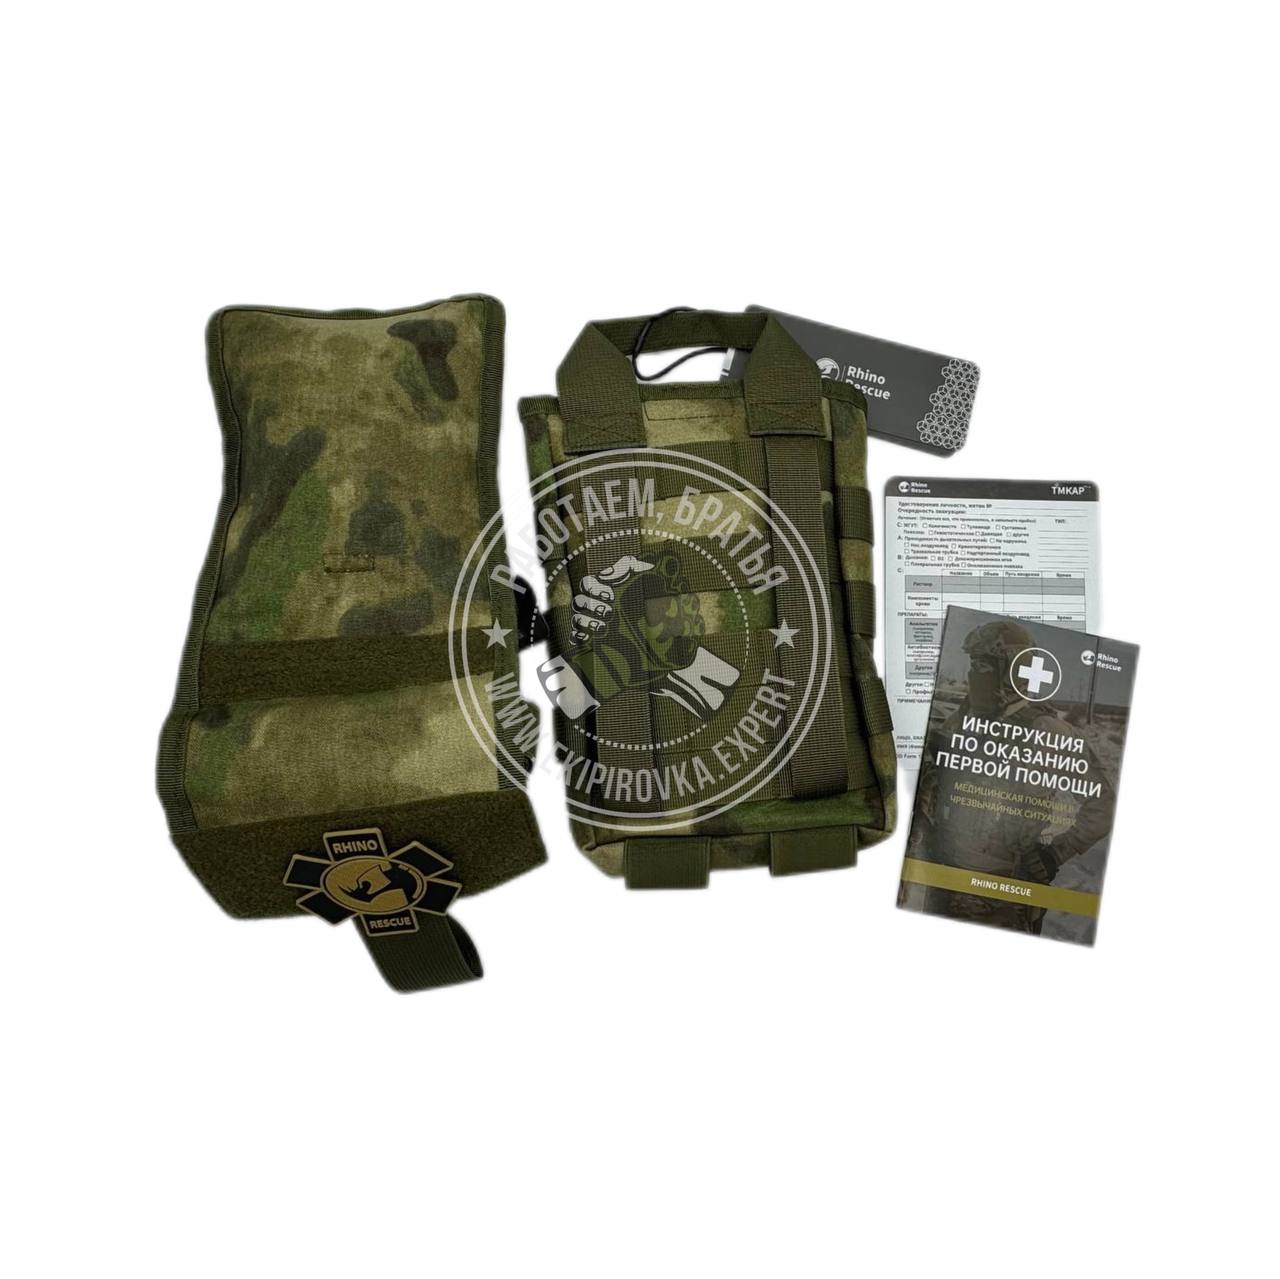 Аптечка RHINO RESCUE  IFAK MEDICAL POUCH FIRST AID KIT 11 в 1 